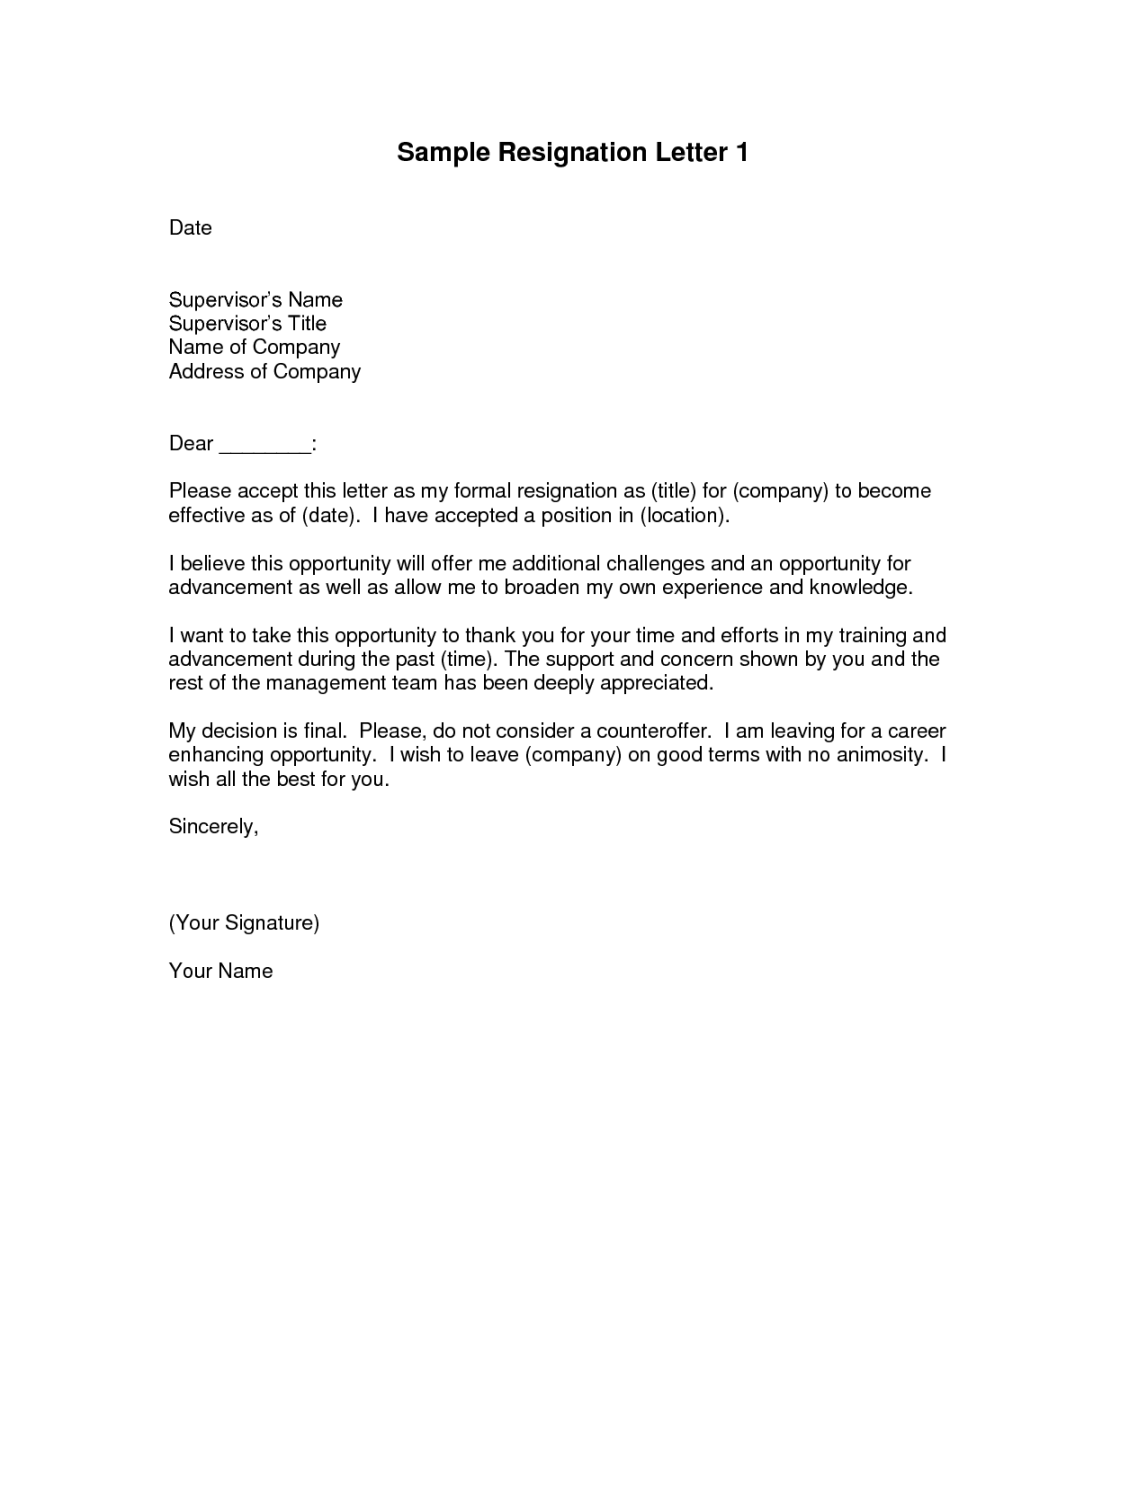 example of resignation letter google search formal resignation